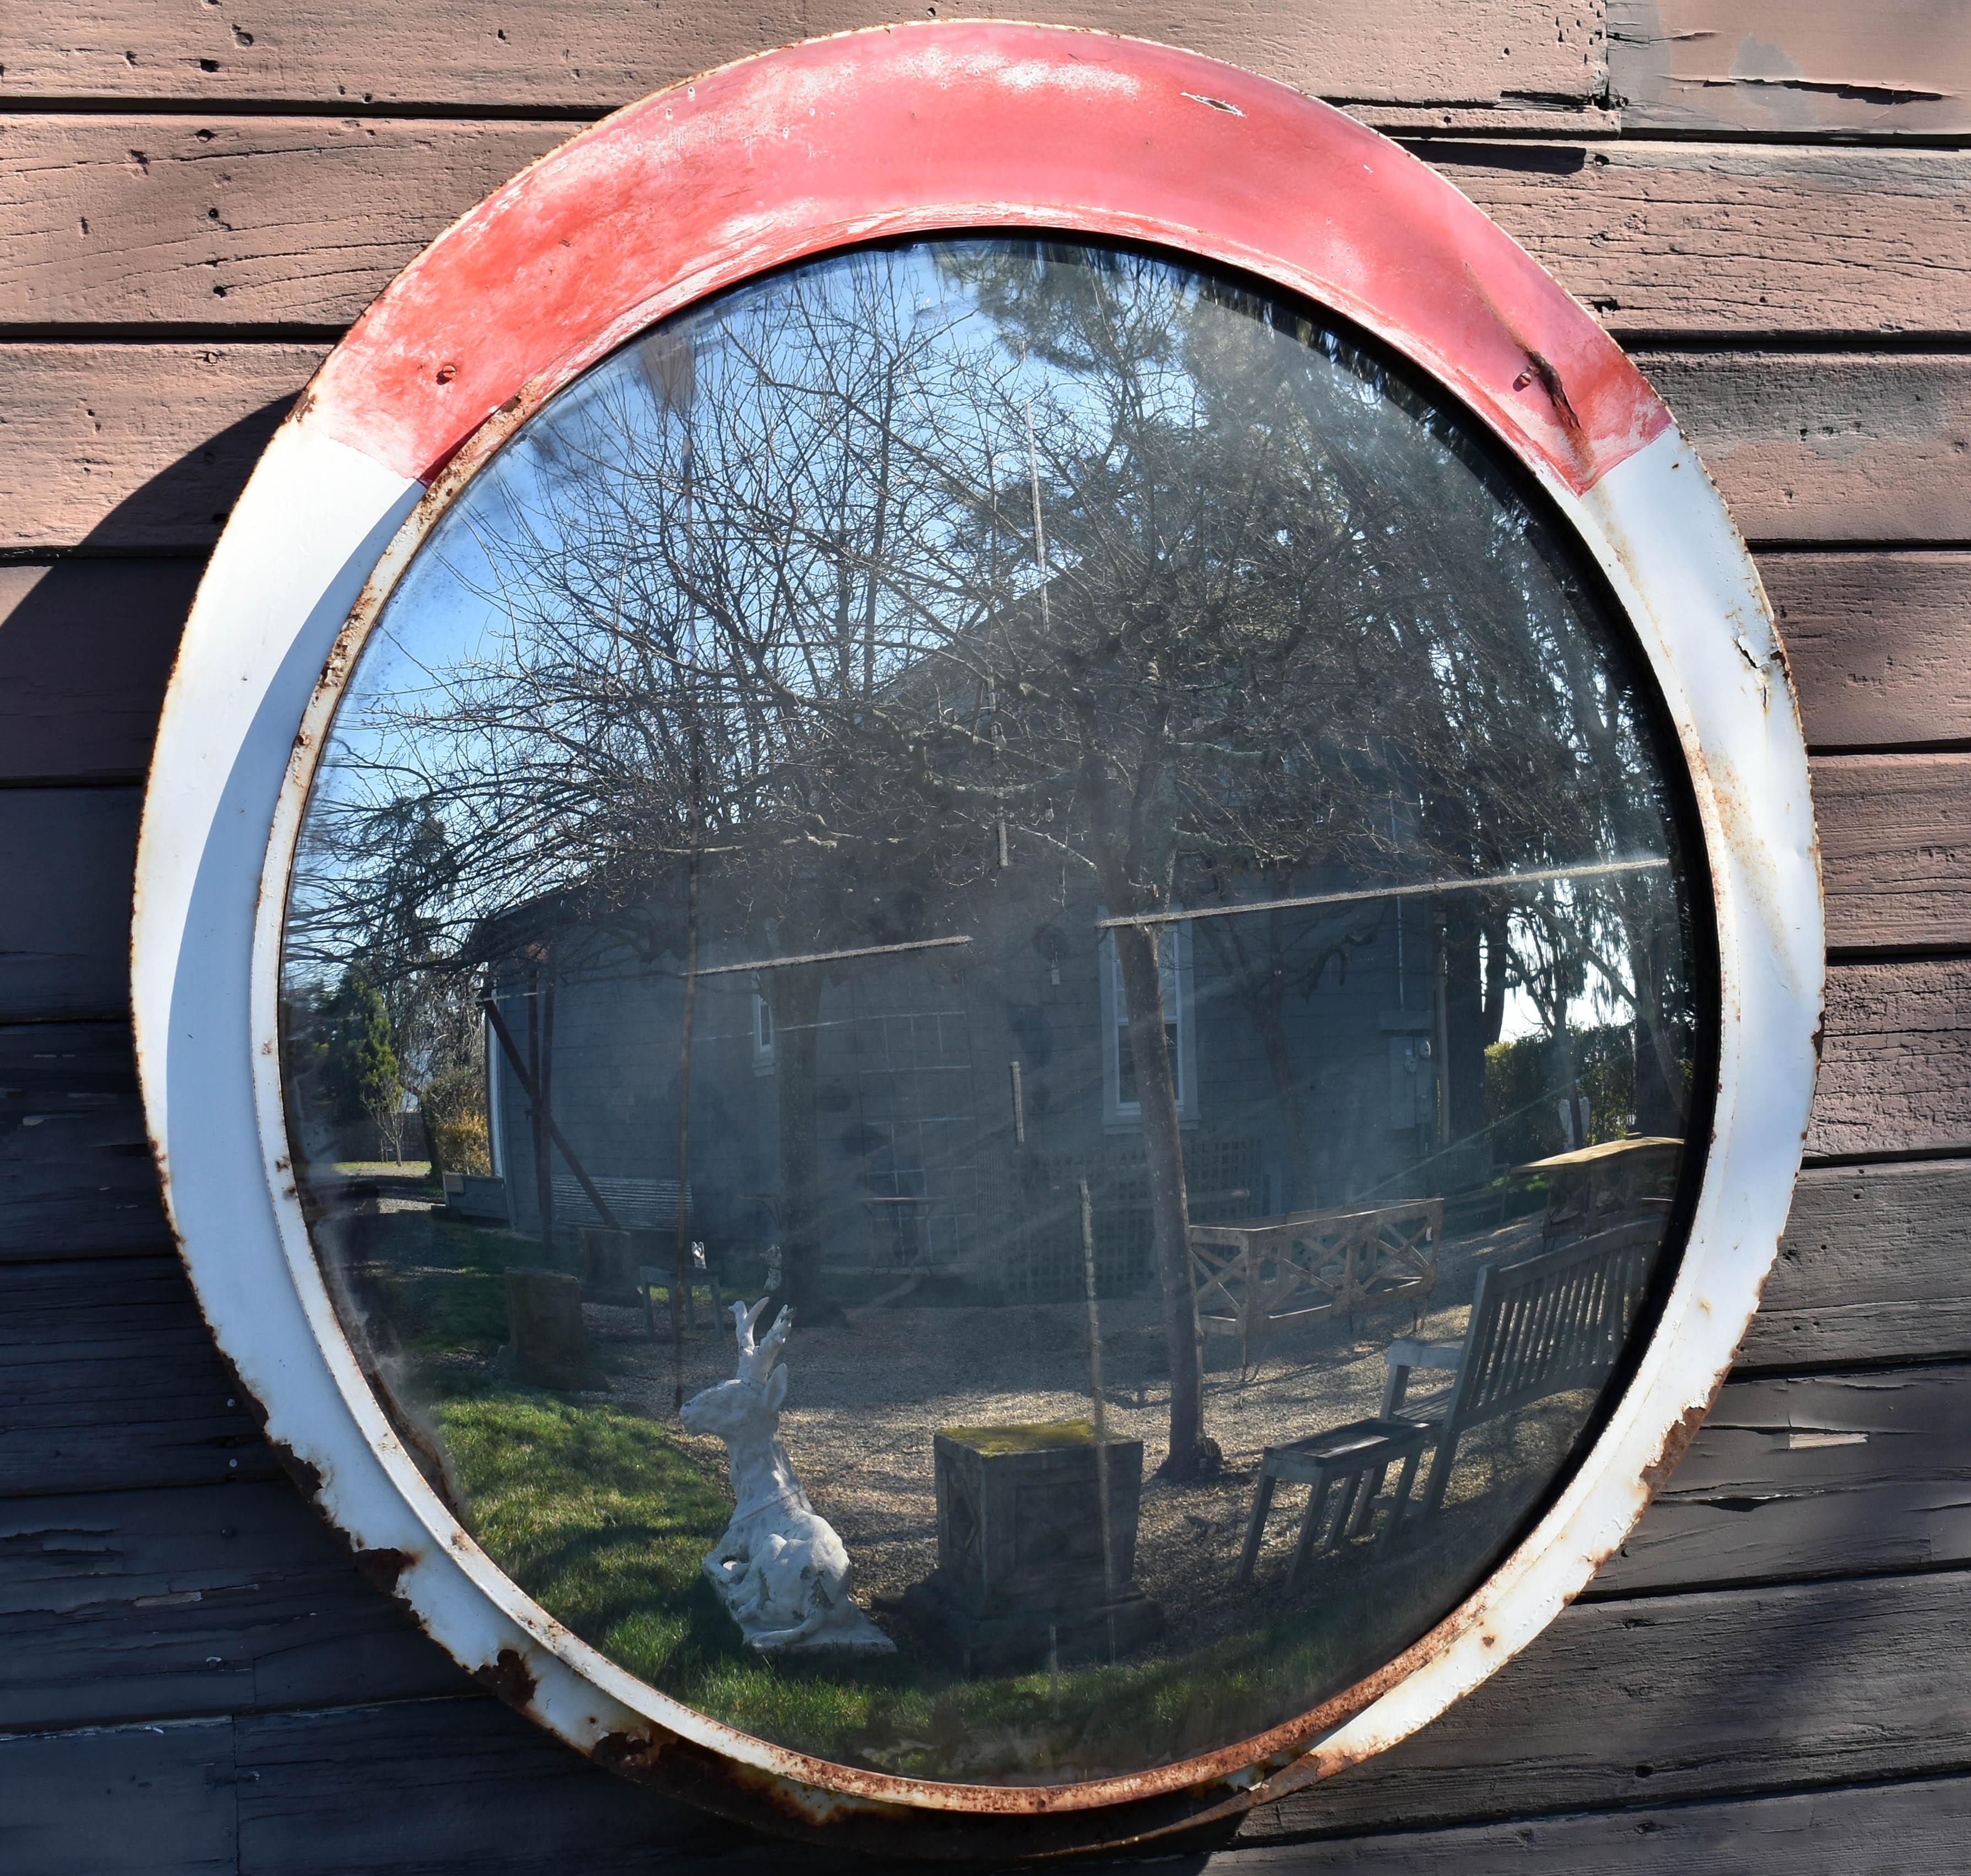 A fantastic opportunity to acquire a hard to find piece, the mirror is very rare and sought after. Originally found on railways in Eastern Europe. Large vintage round train mirror with elliptical frame extending below mirror edge, circa 19th